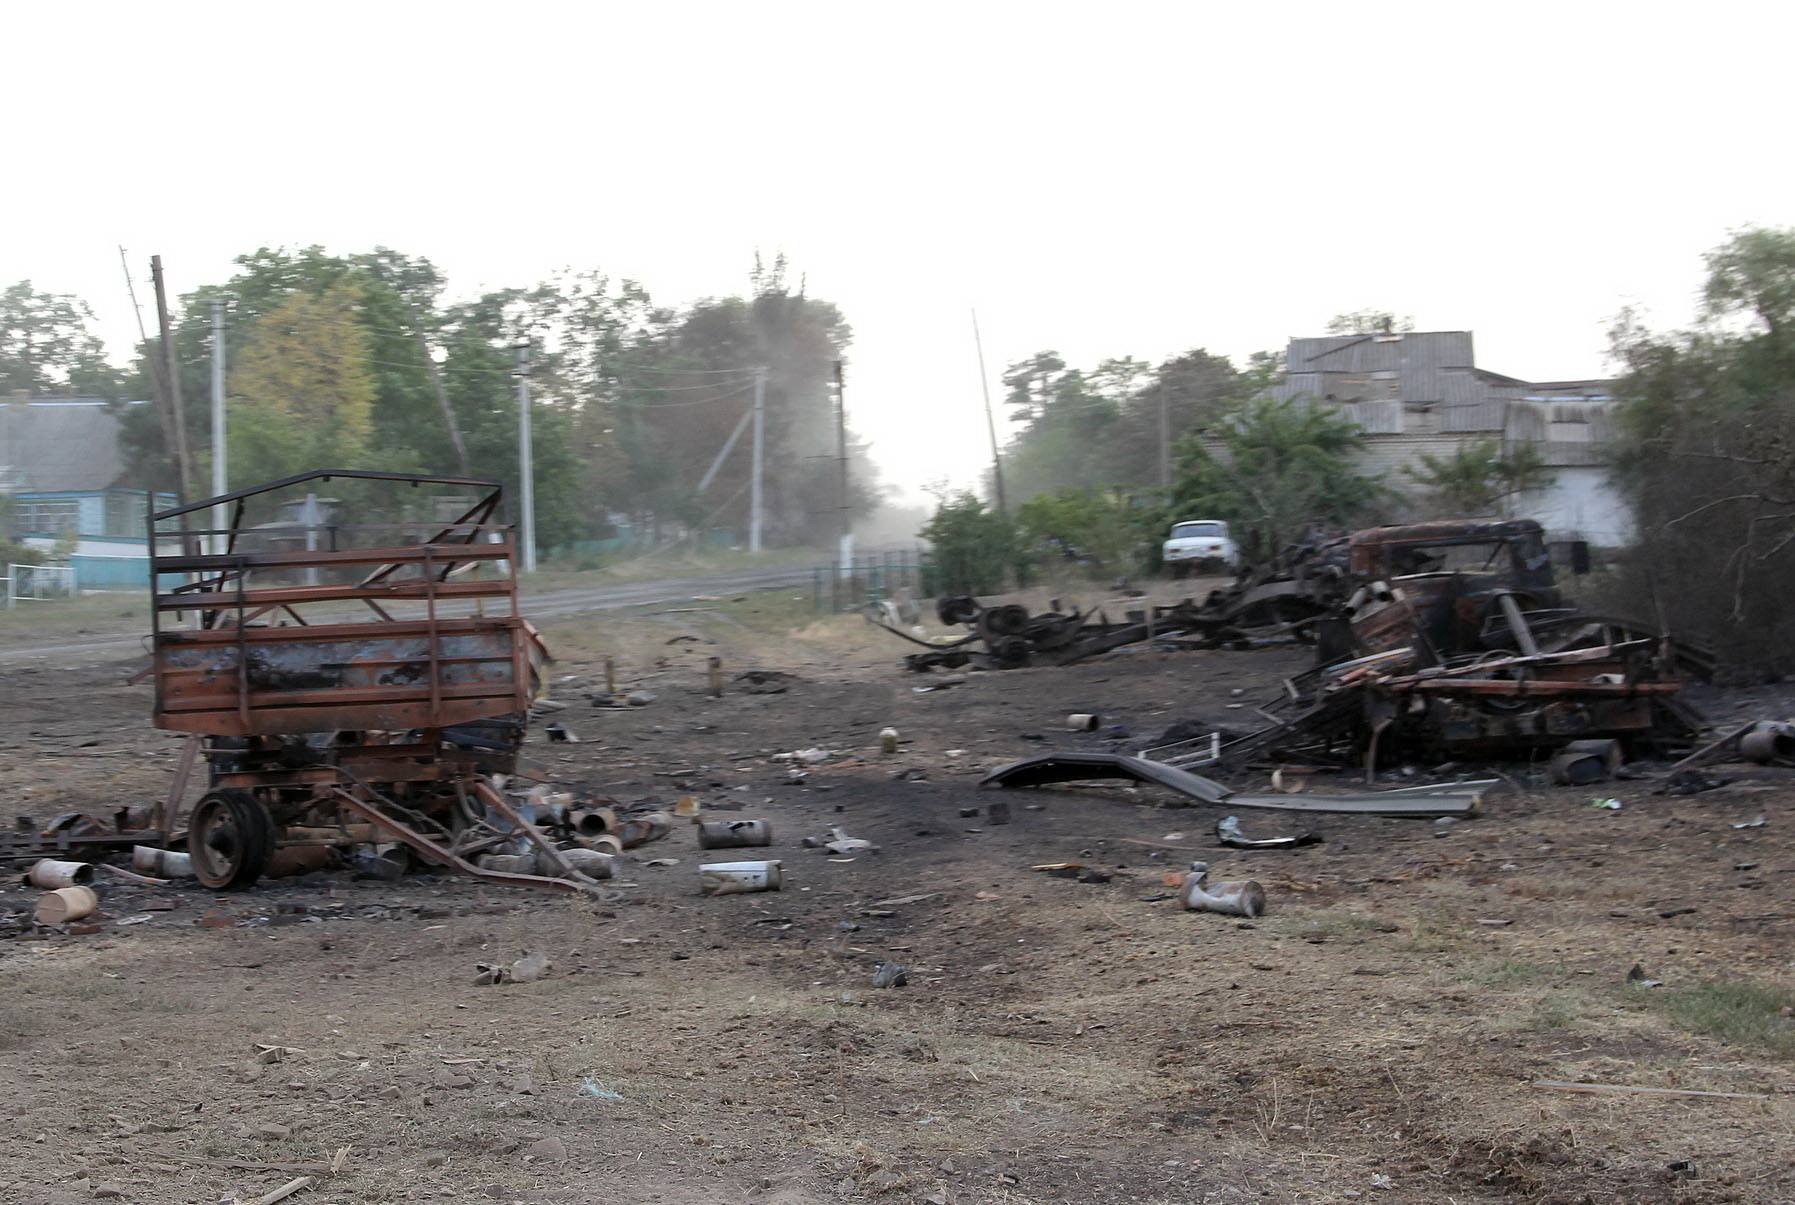 Stepanivka completely destroyed by Russian ‘Grad’ rockets ~~